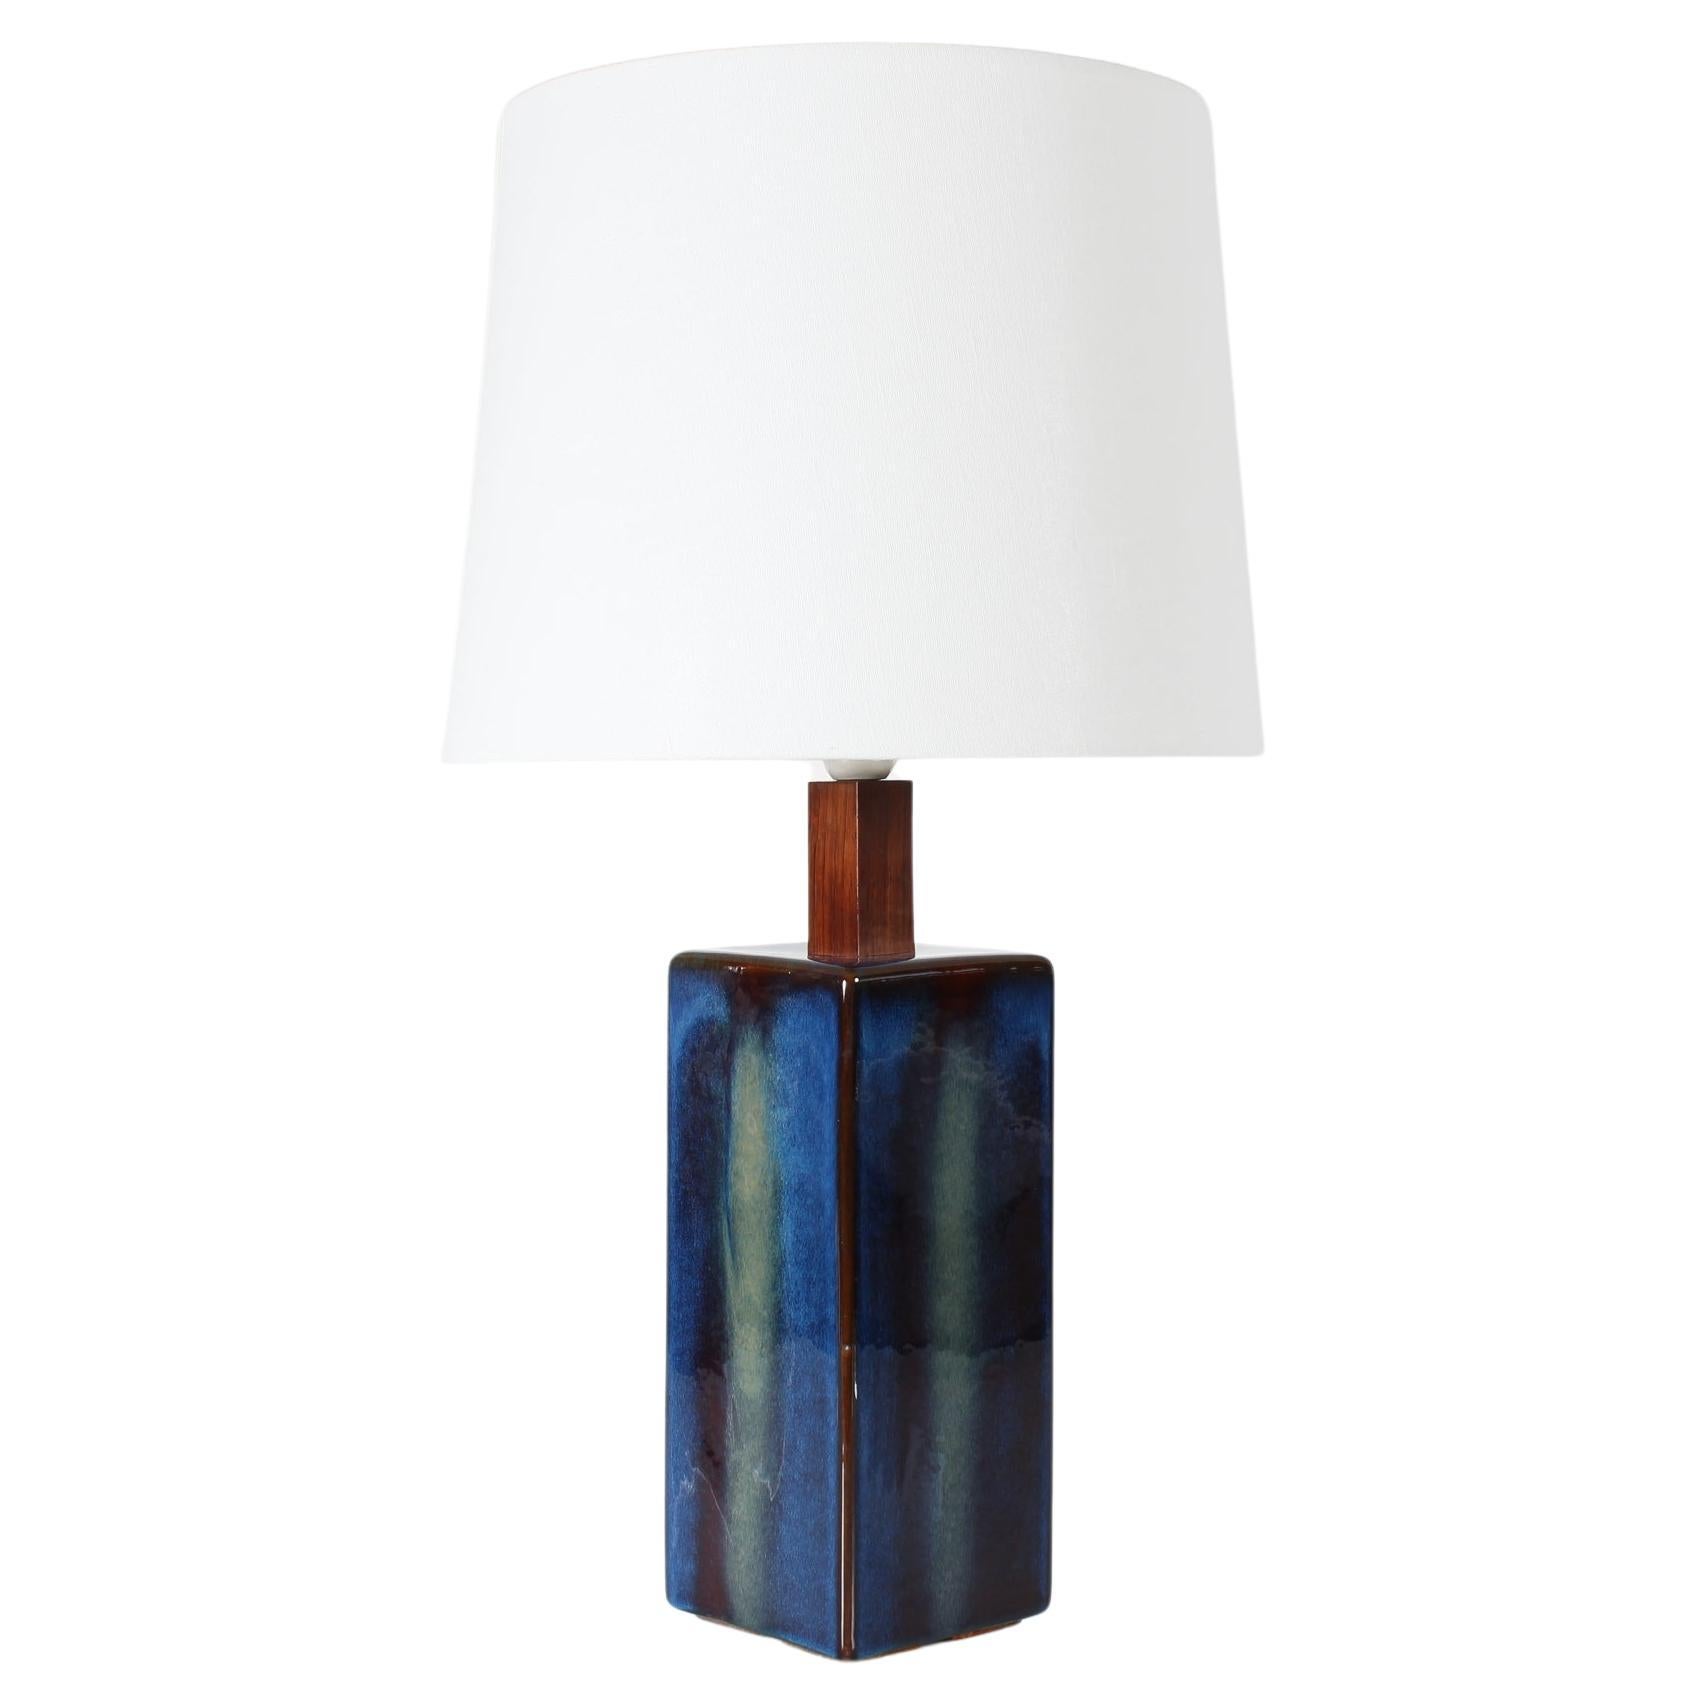 Tall Danish Sculptural Table Lamp with Glossy Dark Blue Green Glaze by Søholm 